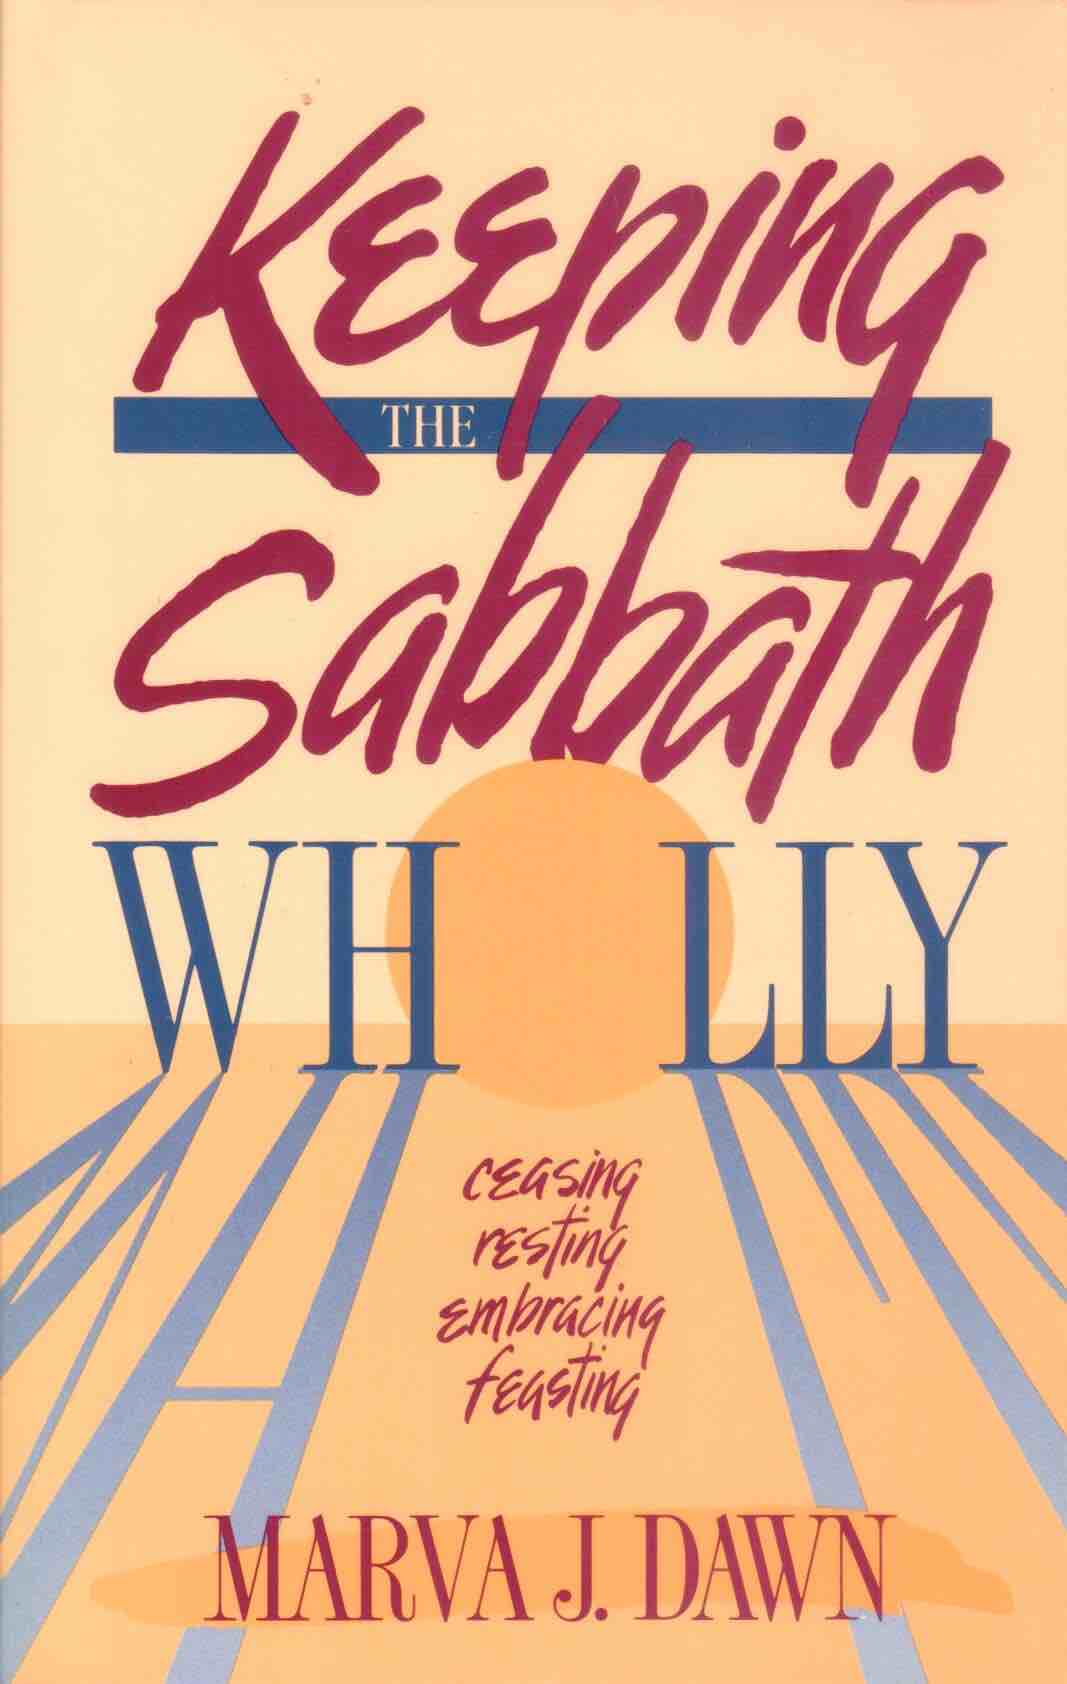 Cover of Keeping the Sabbath Wholly